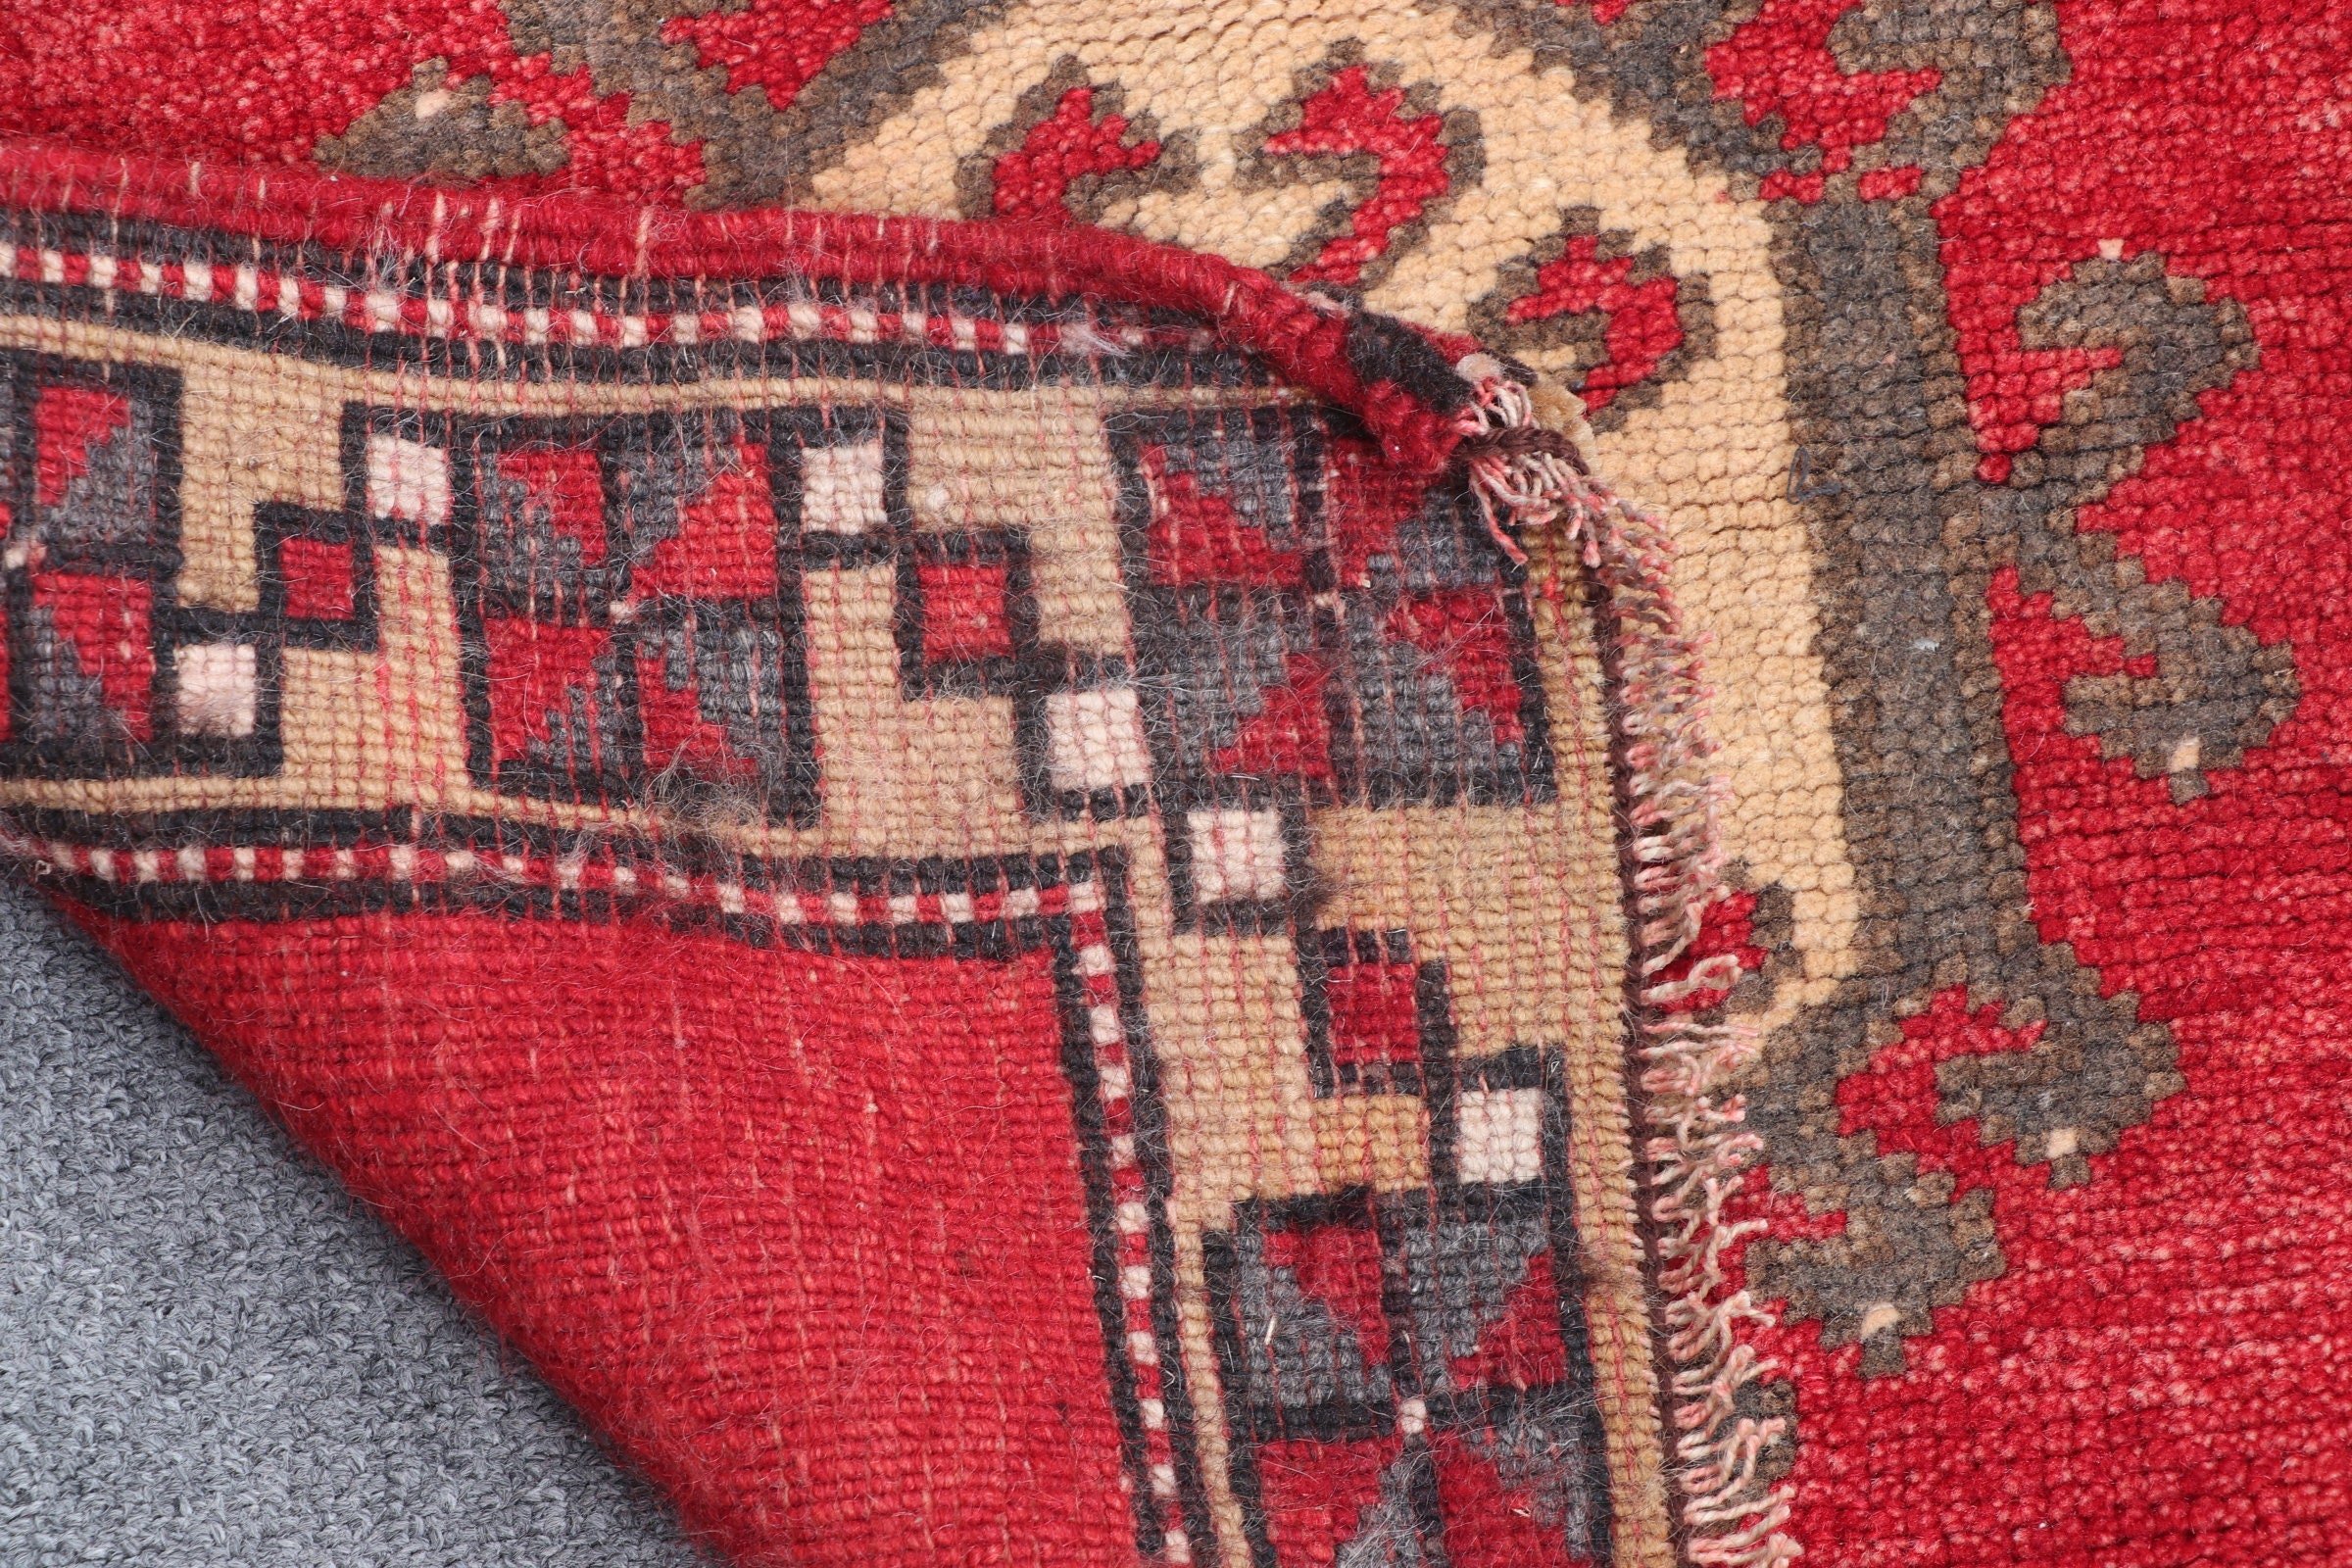 Car Mat Rug, 1.9x2.9 ft Small Rugs, Rugs for Door Mat, Kitchen Rug, Turkish Rugs, Red Oriental Rug, Vintage Rugs, Cool Rug